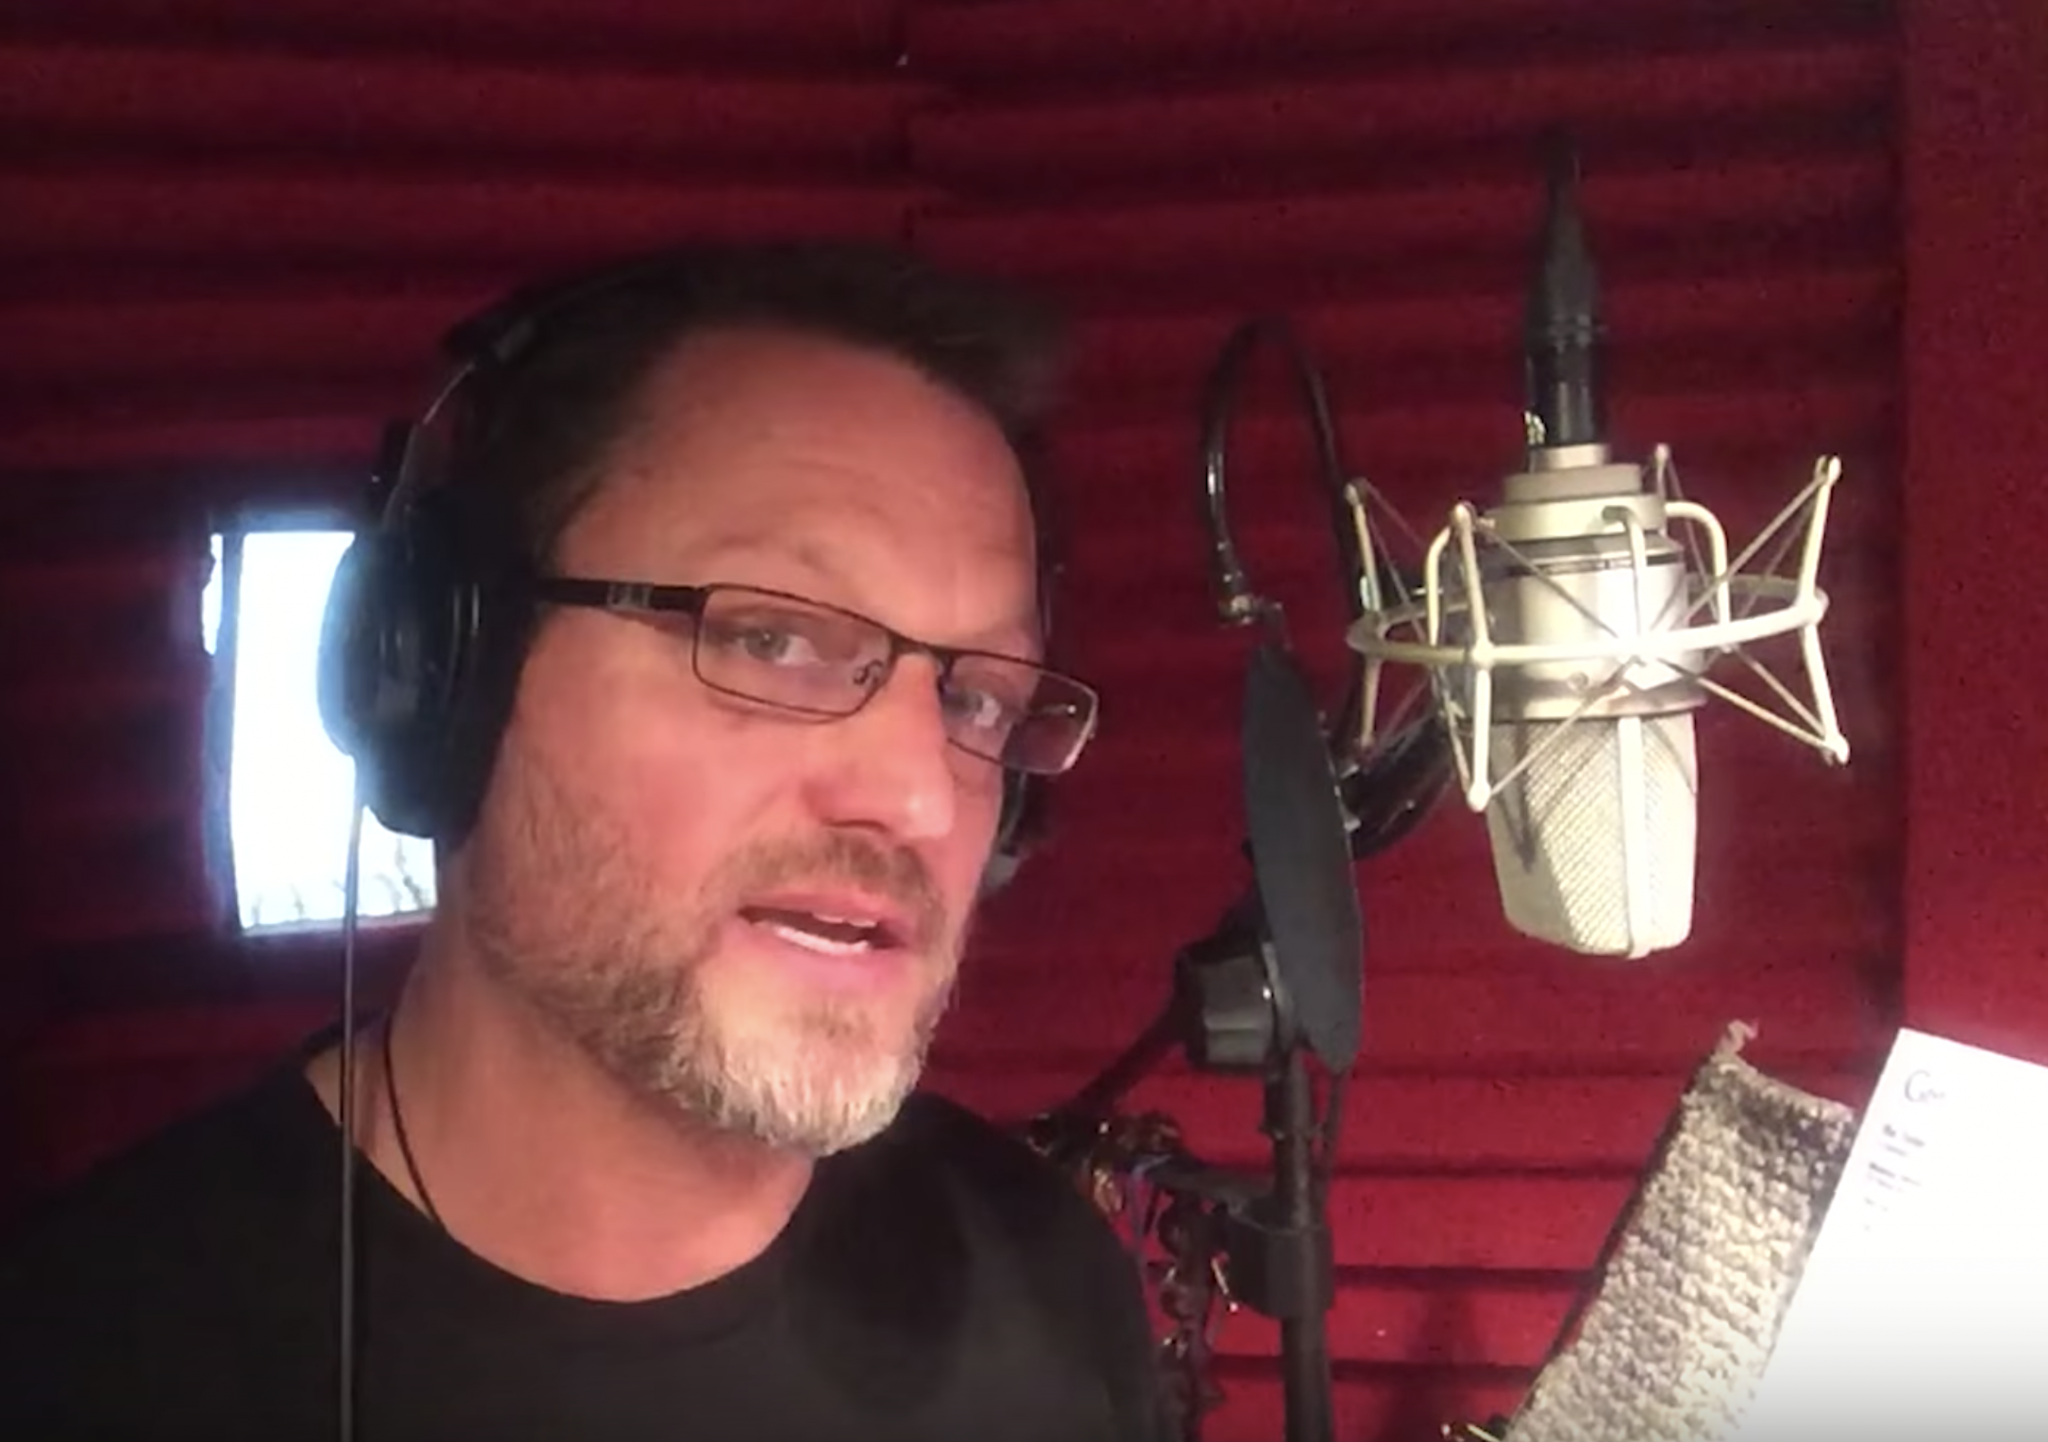 Steve Blum at the microphone with red foam behind